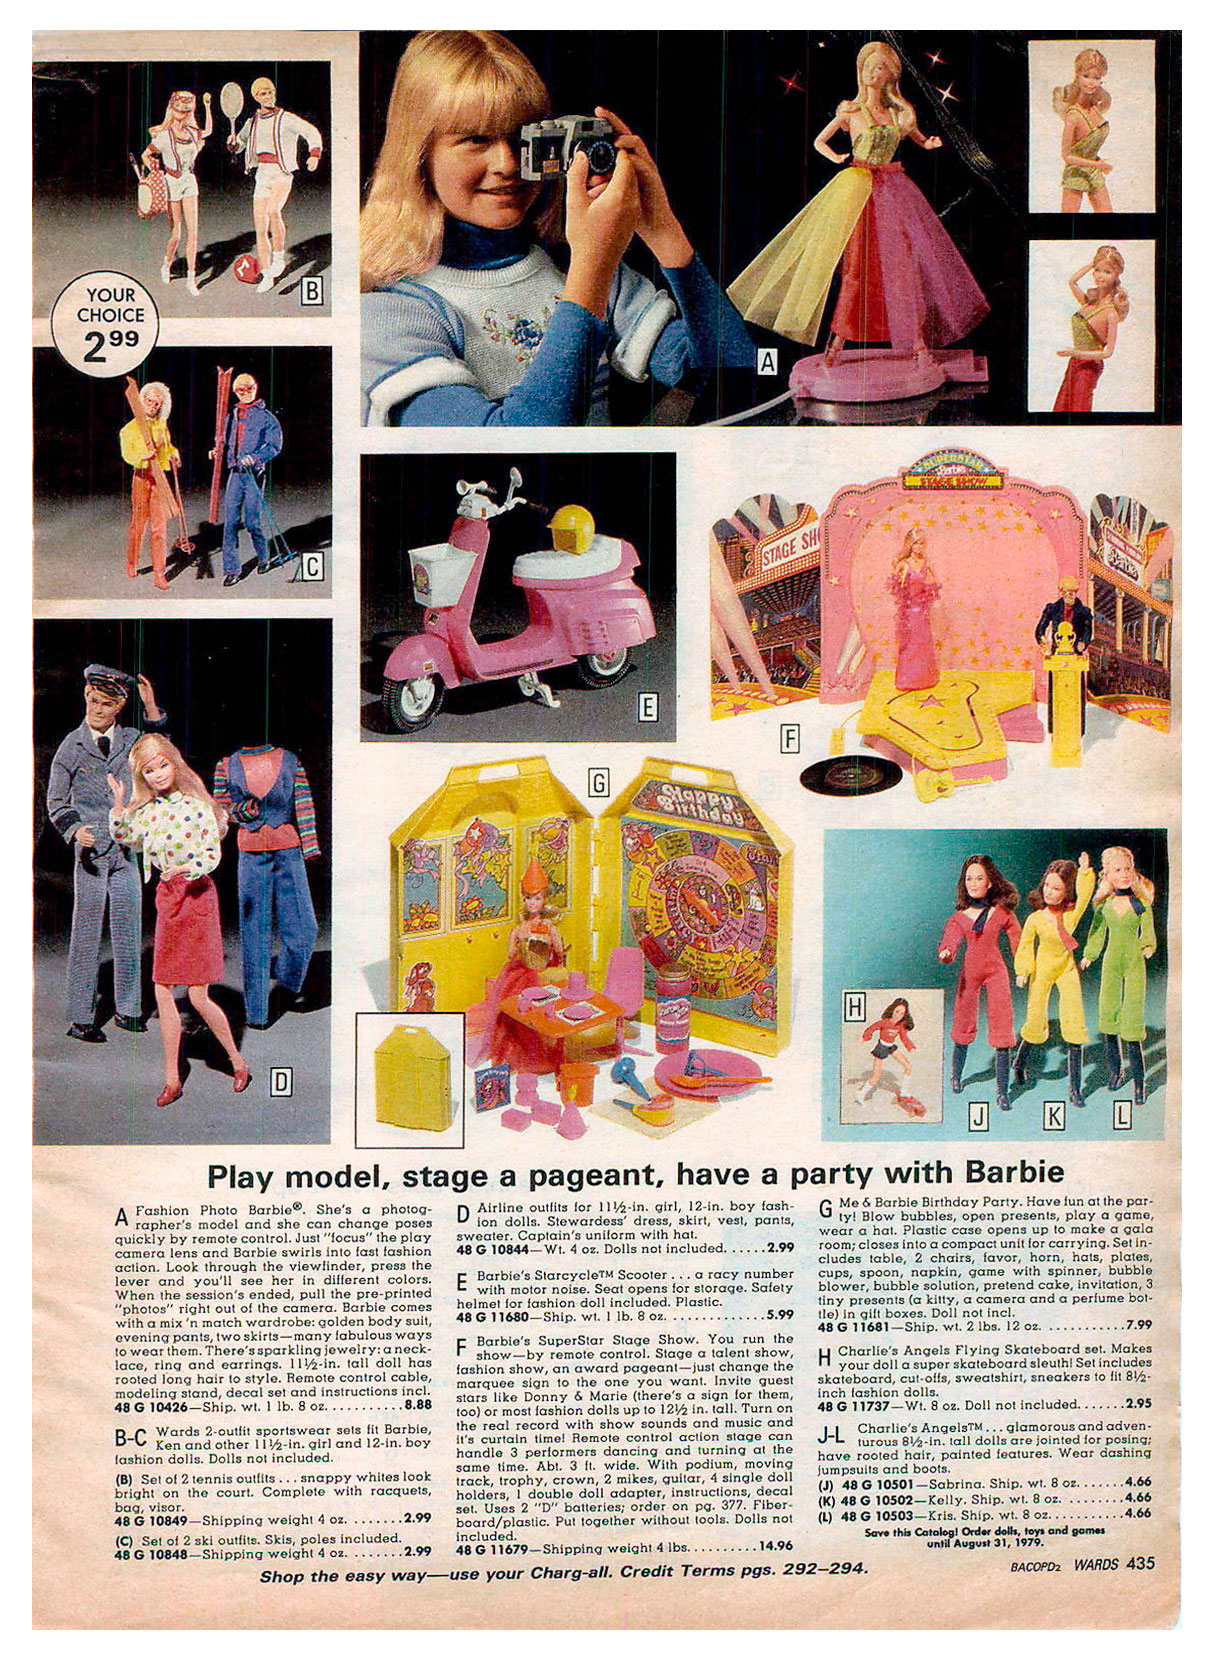 From 1978 Montgomery Ward Christmas catalogue